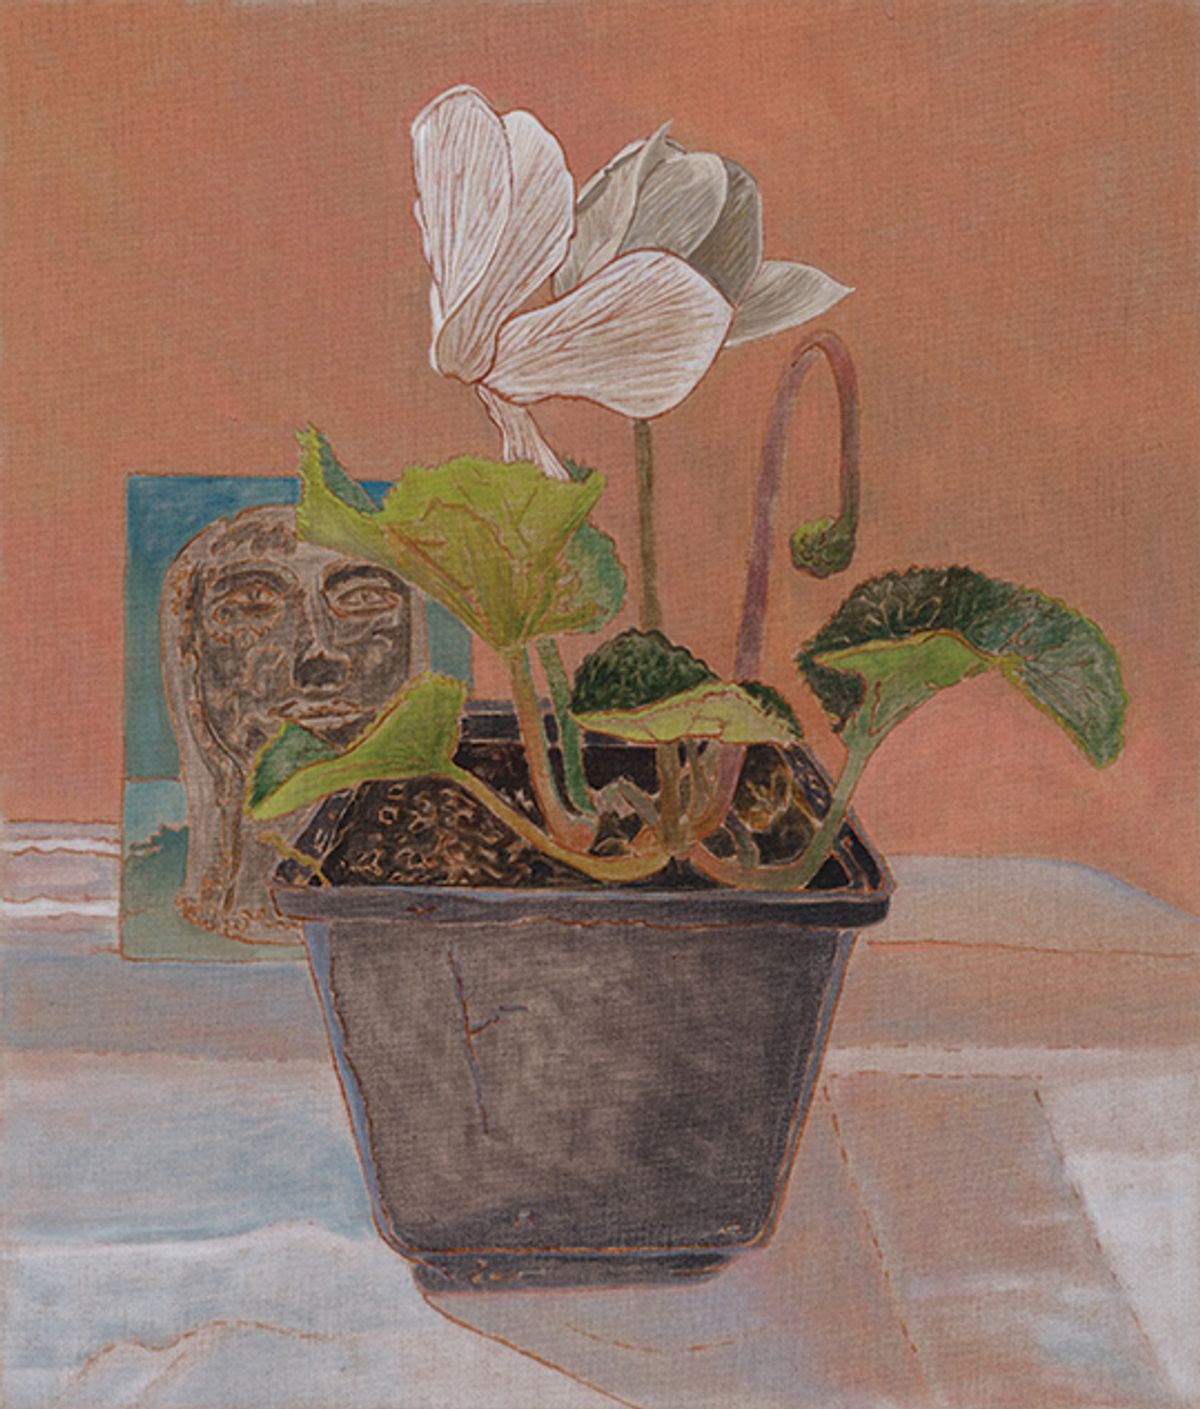 Hayley Barker’s Cyclamen with Postcard from Amy (2022), created during her residency at Laguna Castle Photo: Nik Massey; courtesy of the artist and Night Gallery, Los Angeles